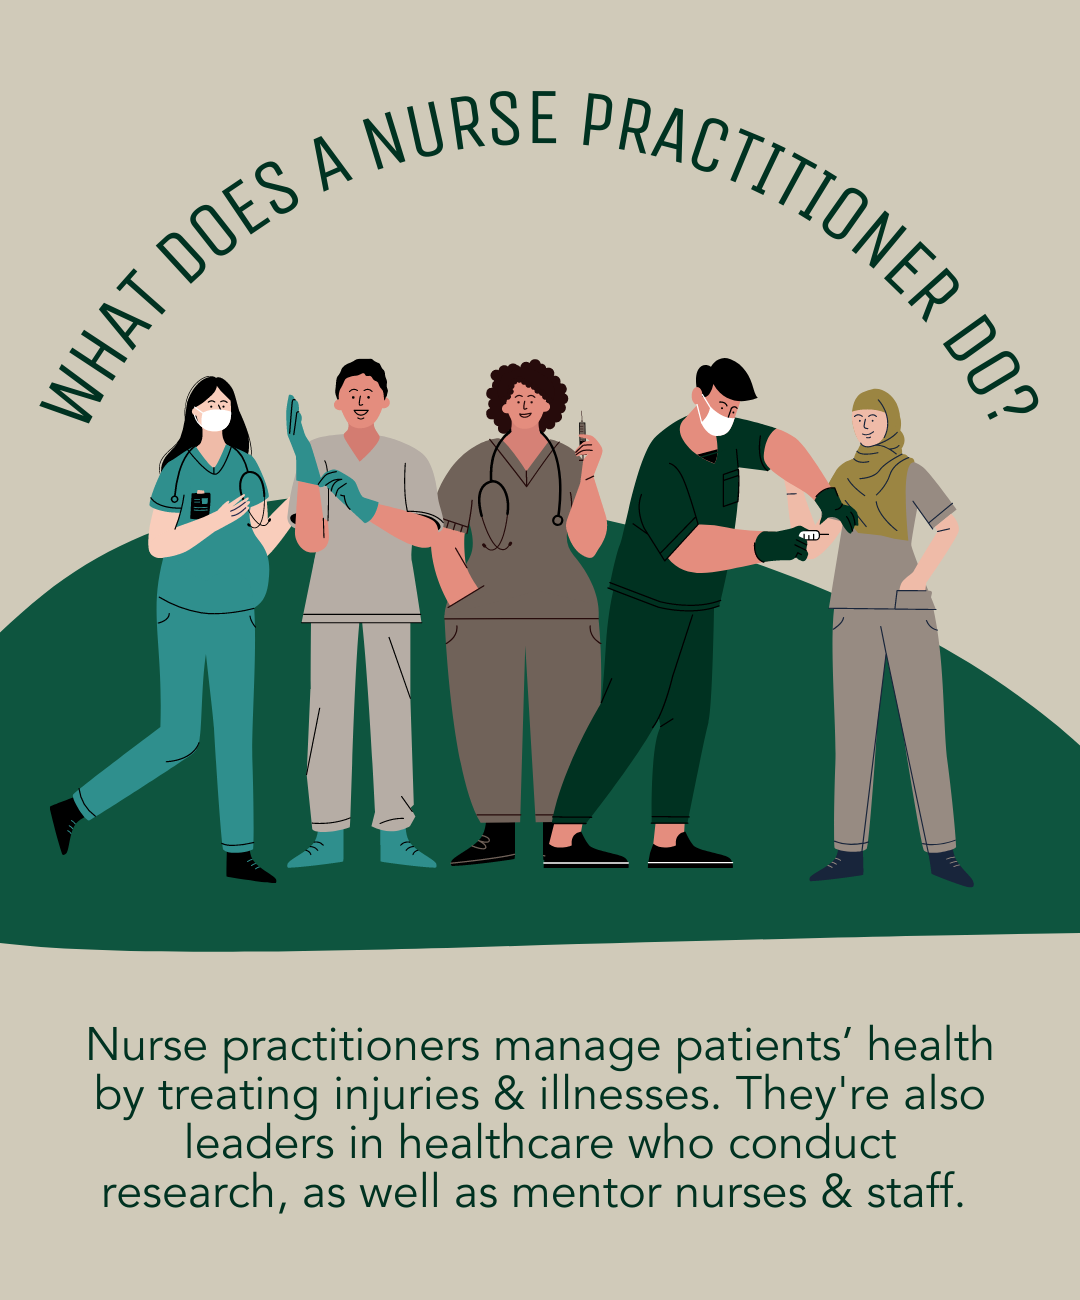 What does a nurse practitioner do? Nurse practitioners manage patients' health by treating injuries & illnesses. They're also leaders in healthcare who conduct research, as well as mentor nurses & staff.